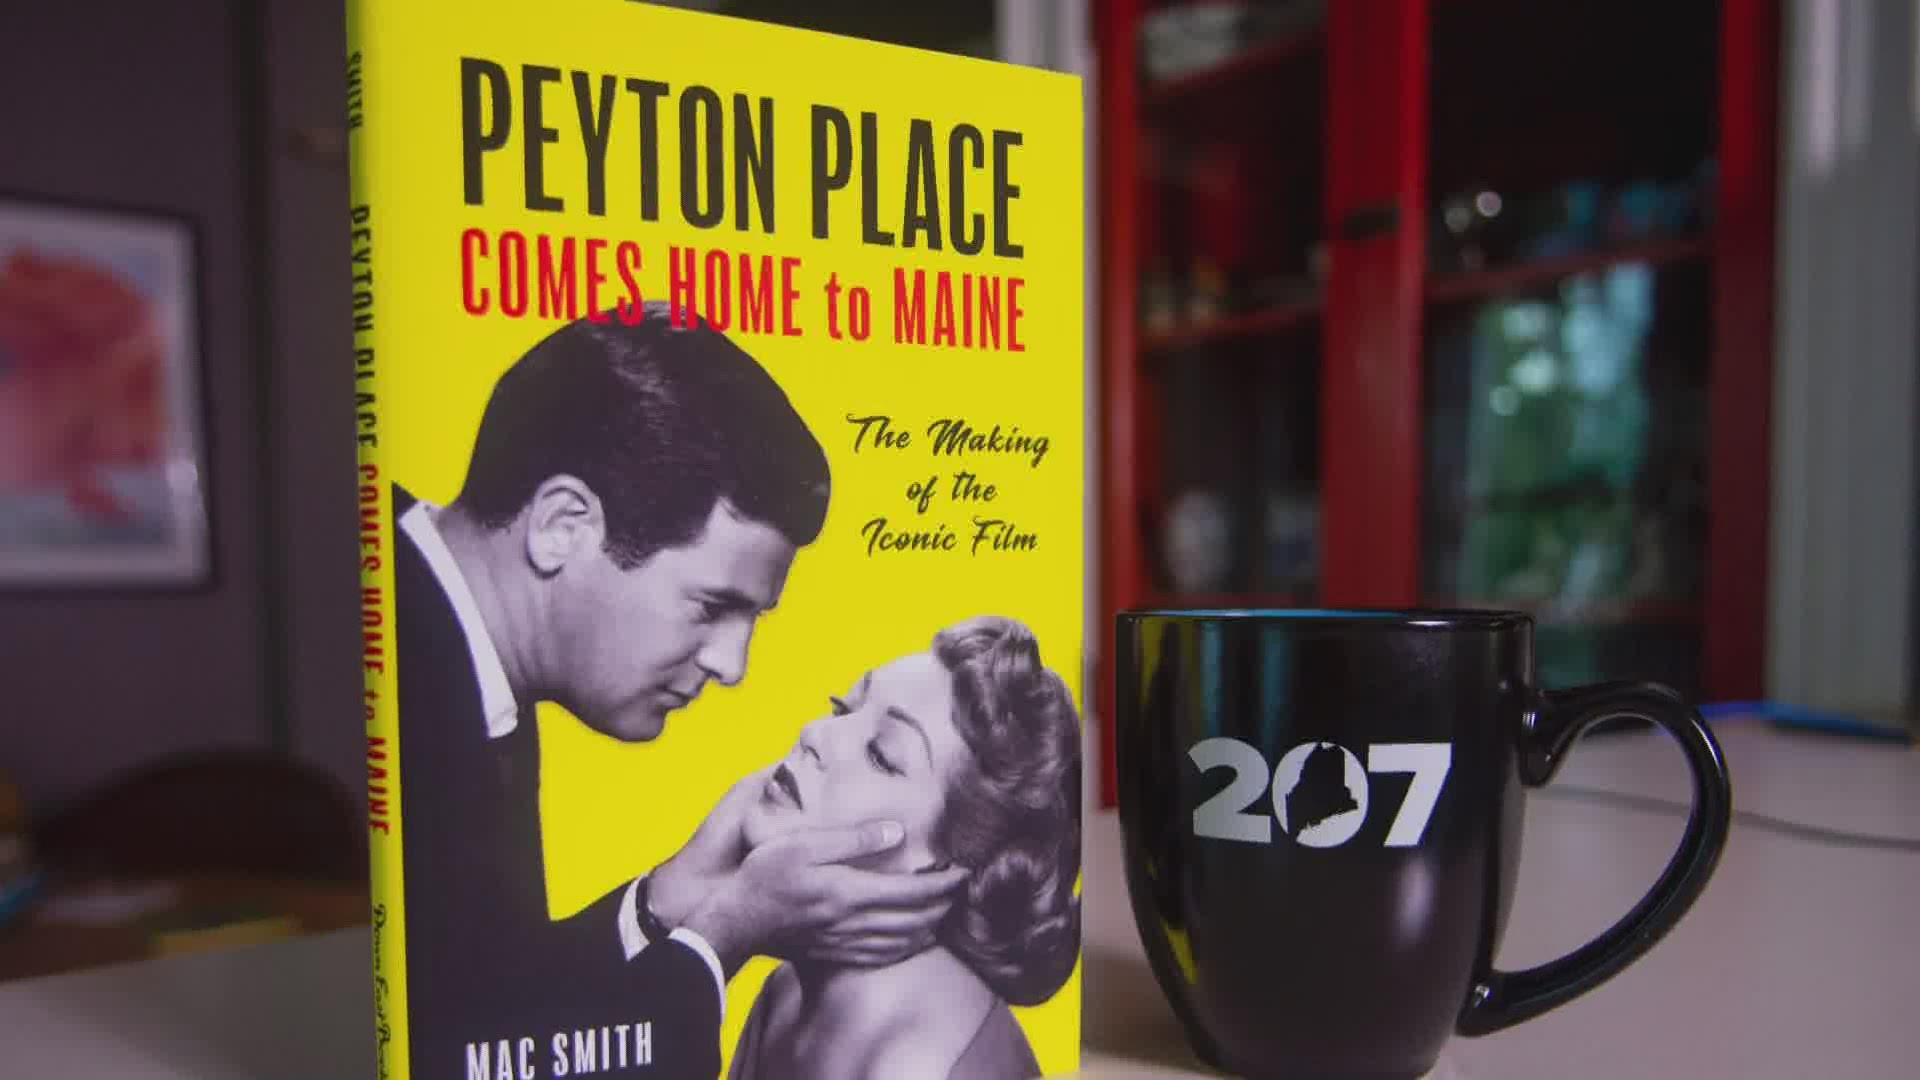 An author and historian, Smith tells the story of the controversial film finding it's location in mid-coast Maine.